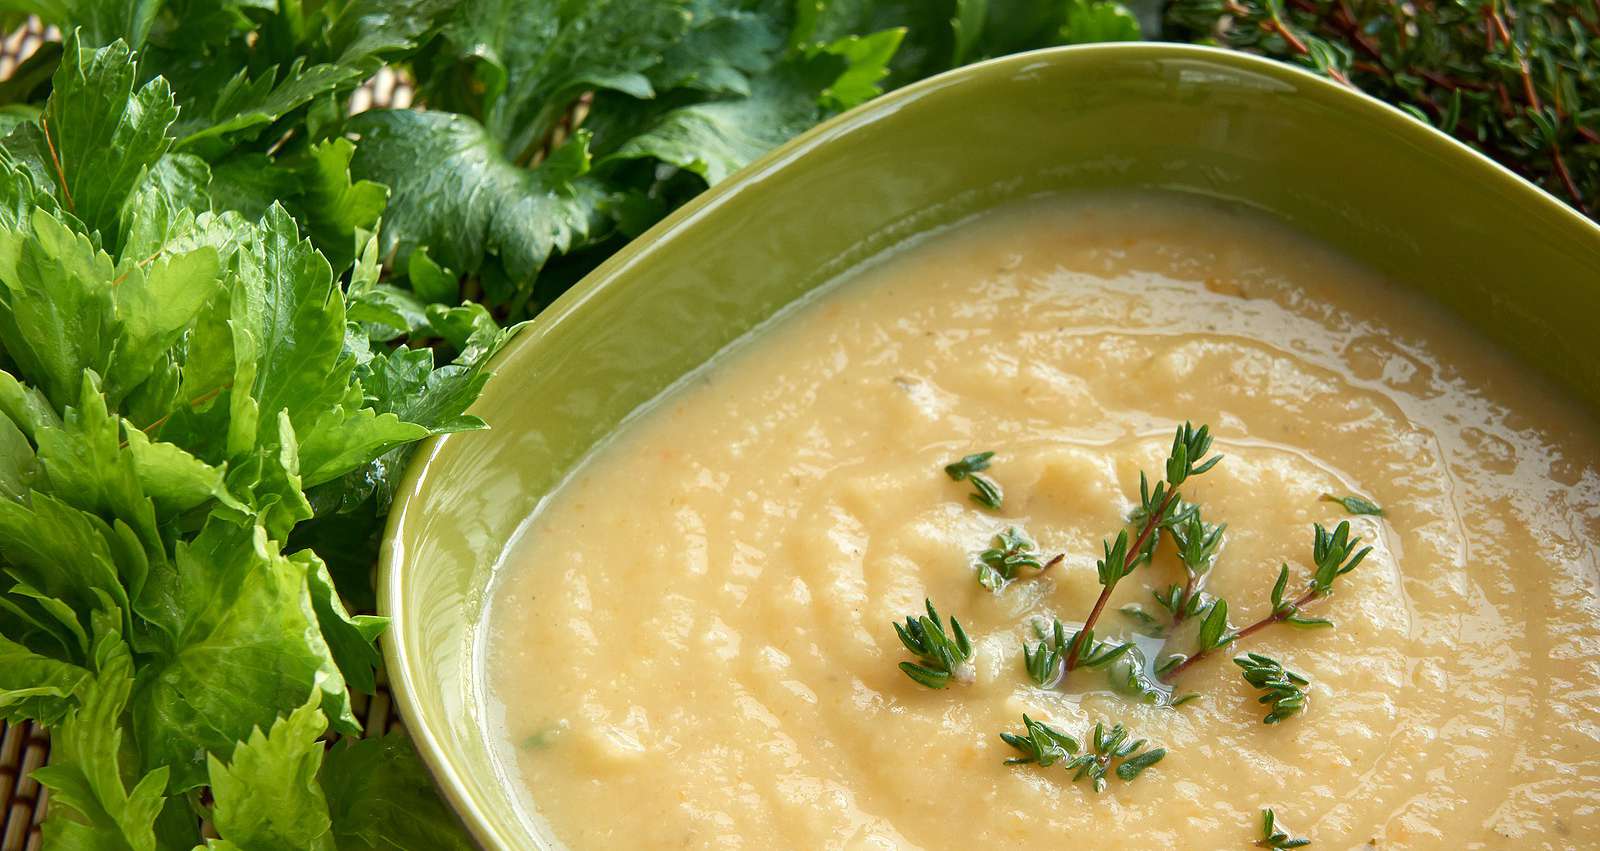 Celery Root and Parsnip Soup